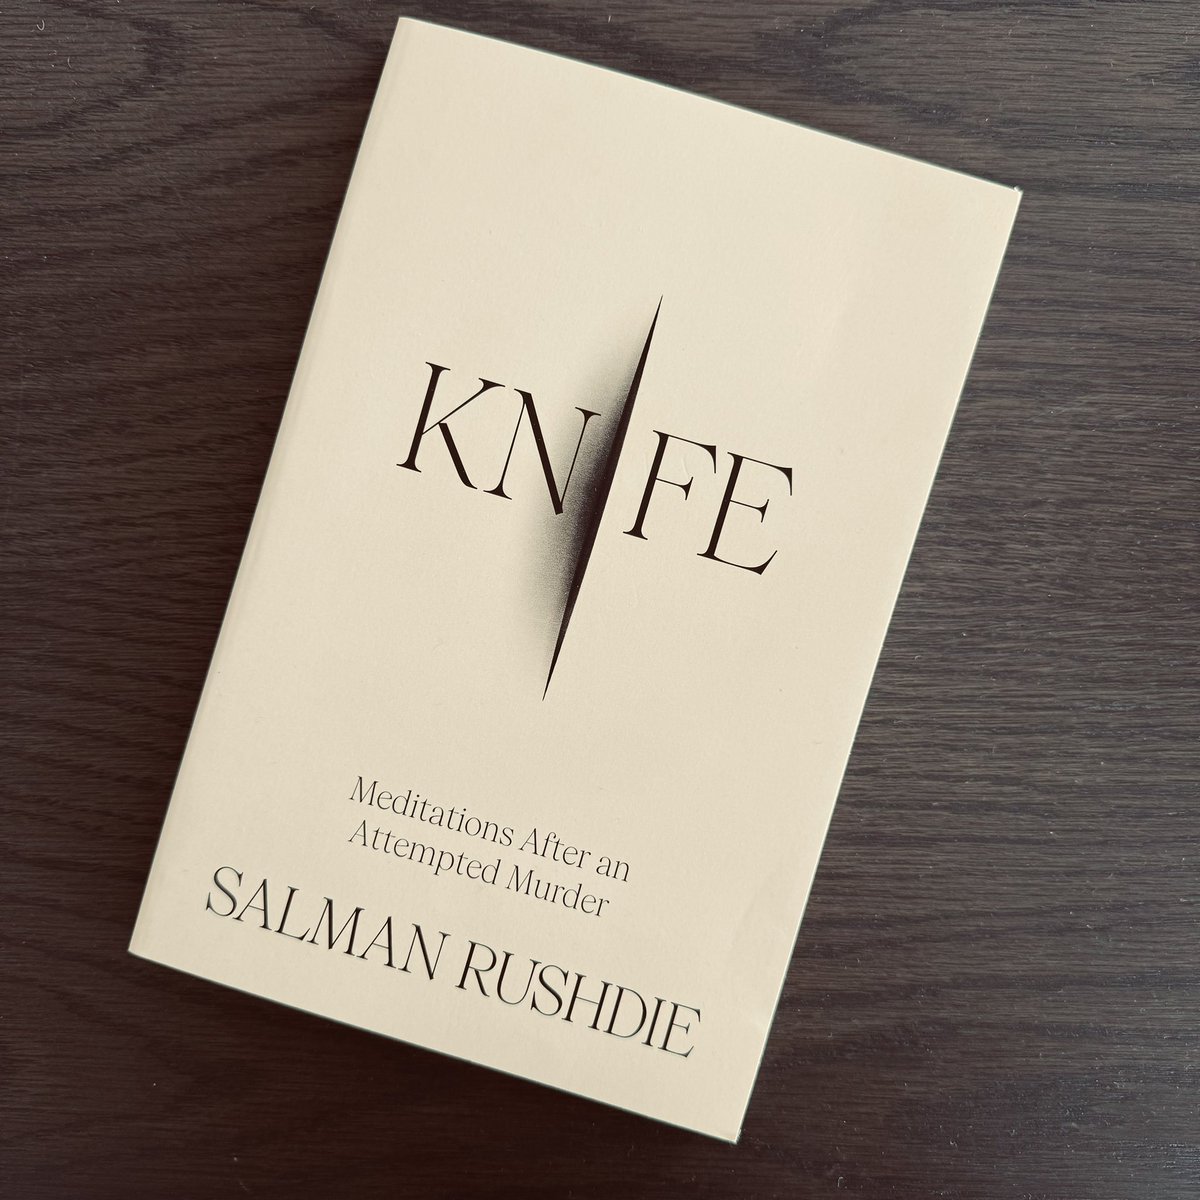 Time differences being what they are, Tuesday the 16th came earlier here in Australia. This is hardly significant in itself, but since this is the publication date of #Knife by Salman Rushdie, in this regard it’s of supreme importance. So I rushed to the #pottspointbookshop this…